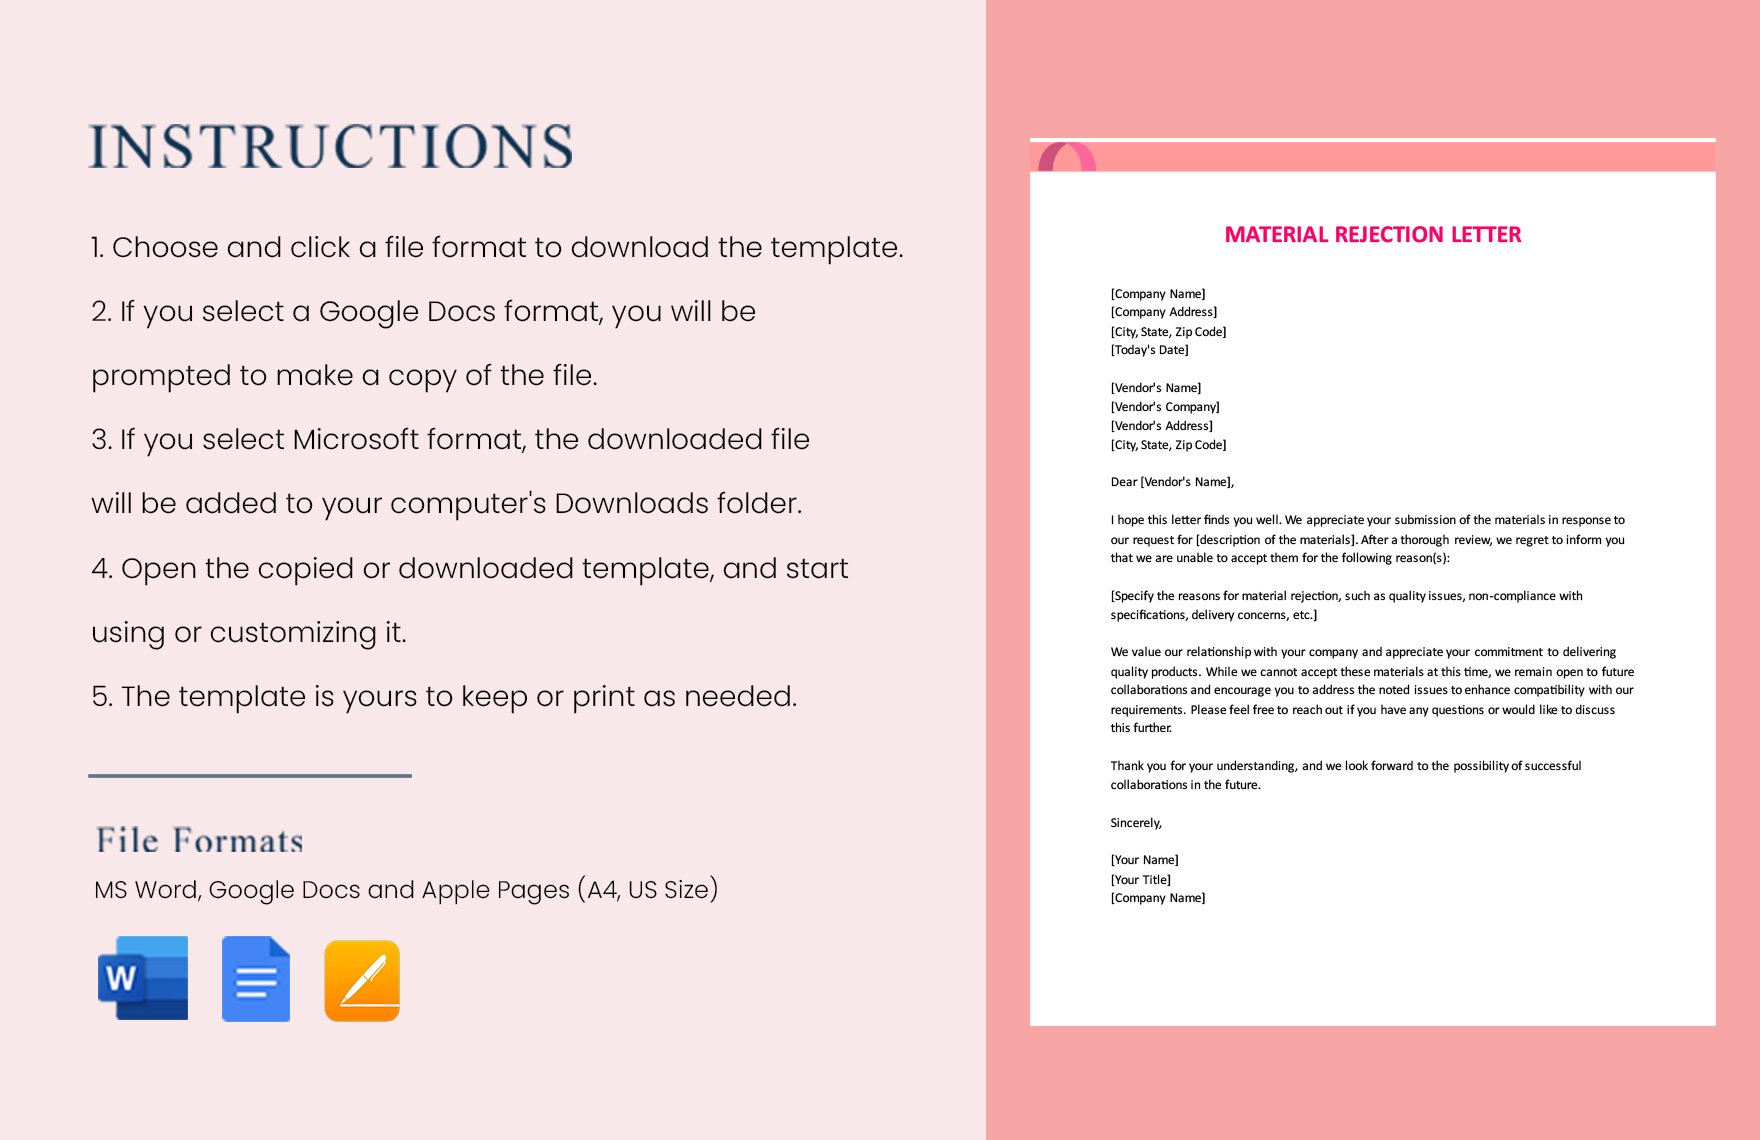 Material Rejection Letter